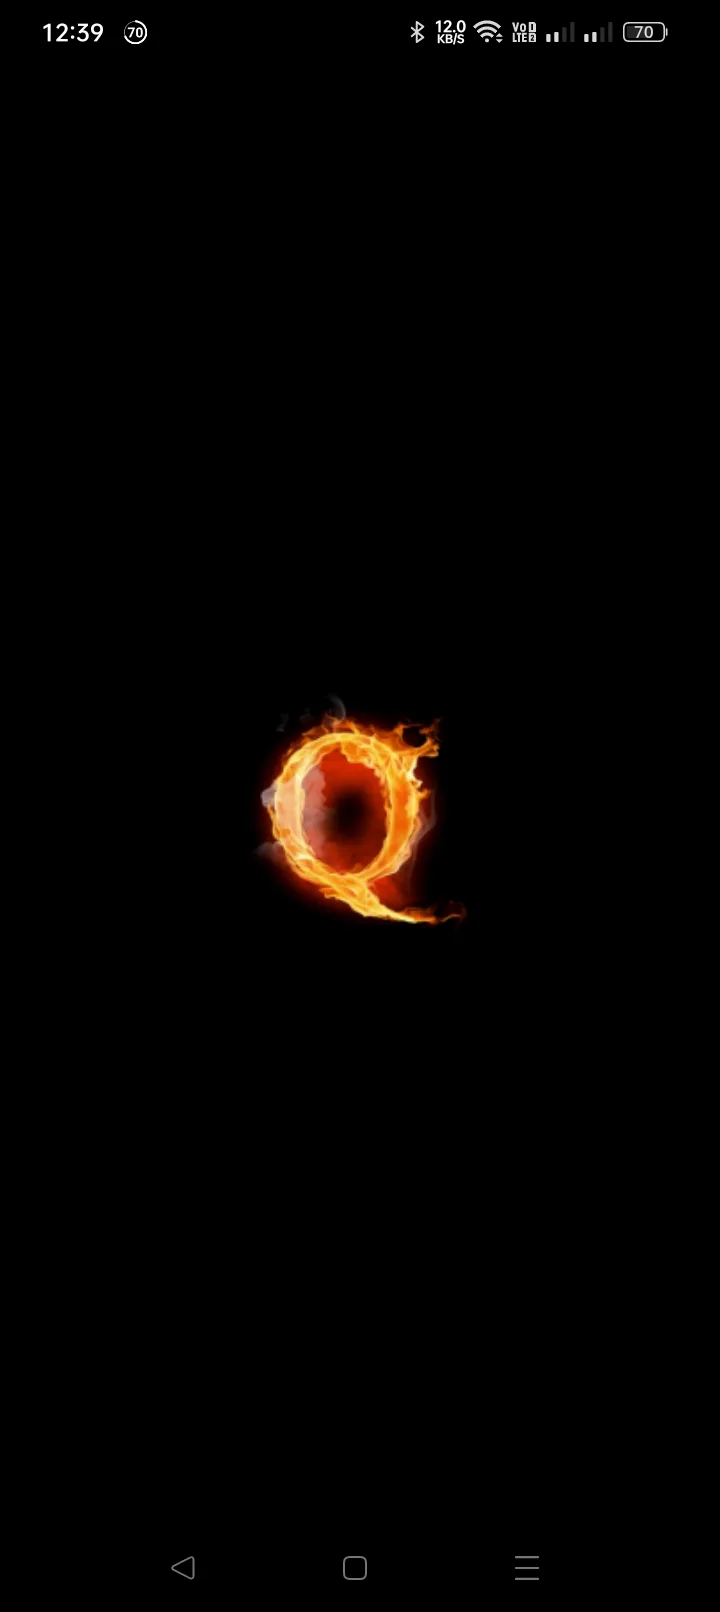 QANONSEC releases Q Browser Android app